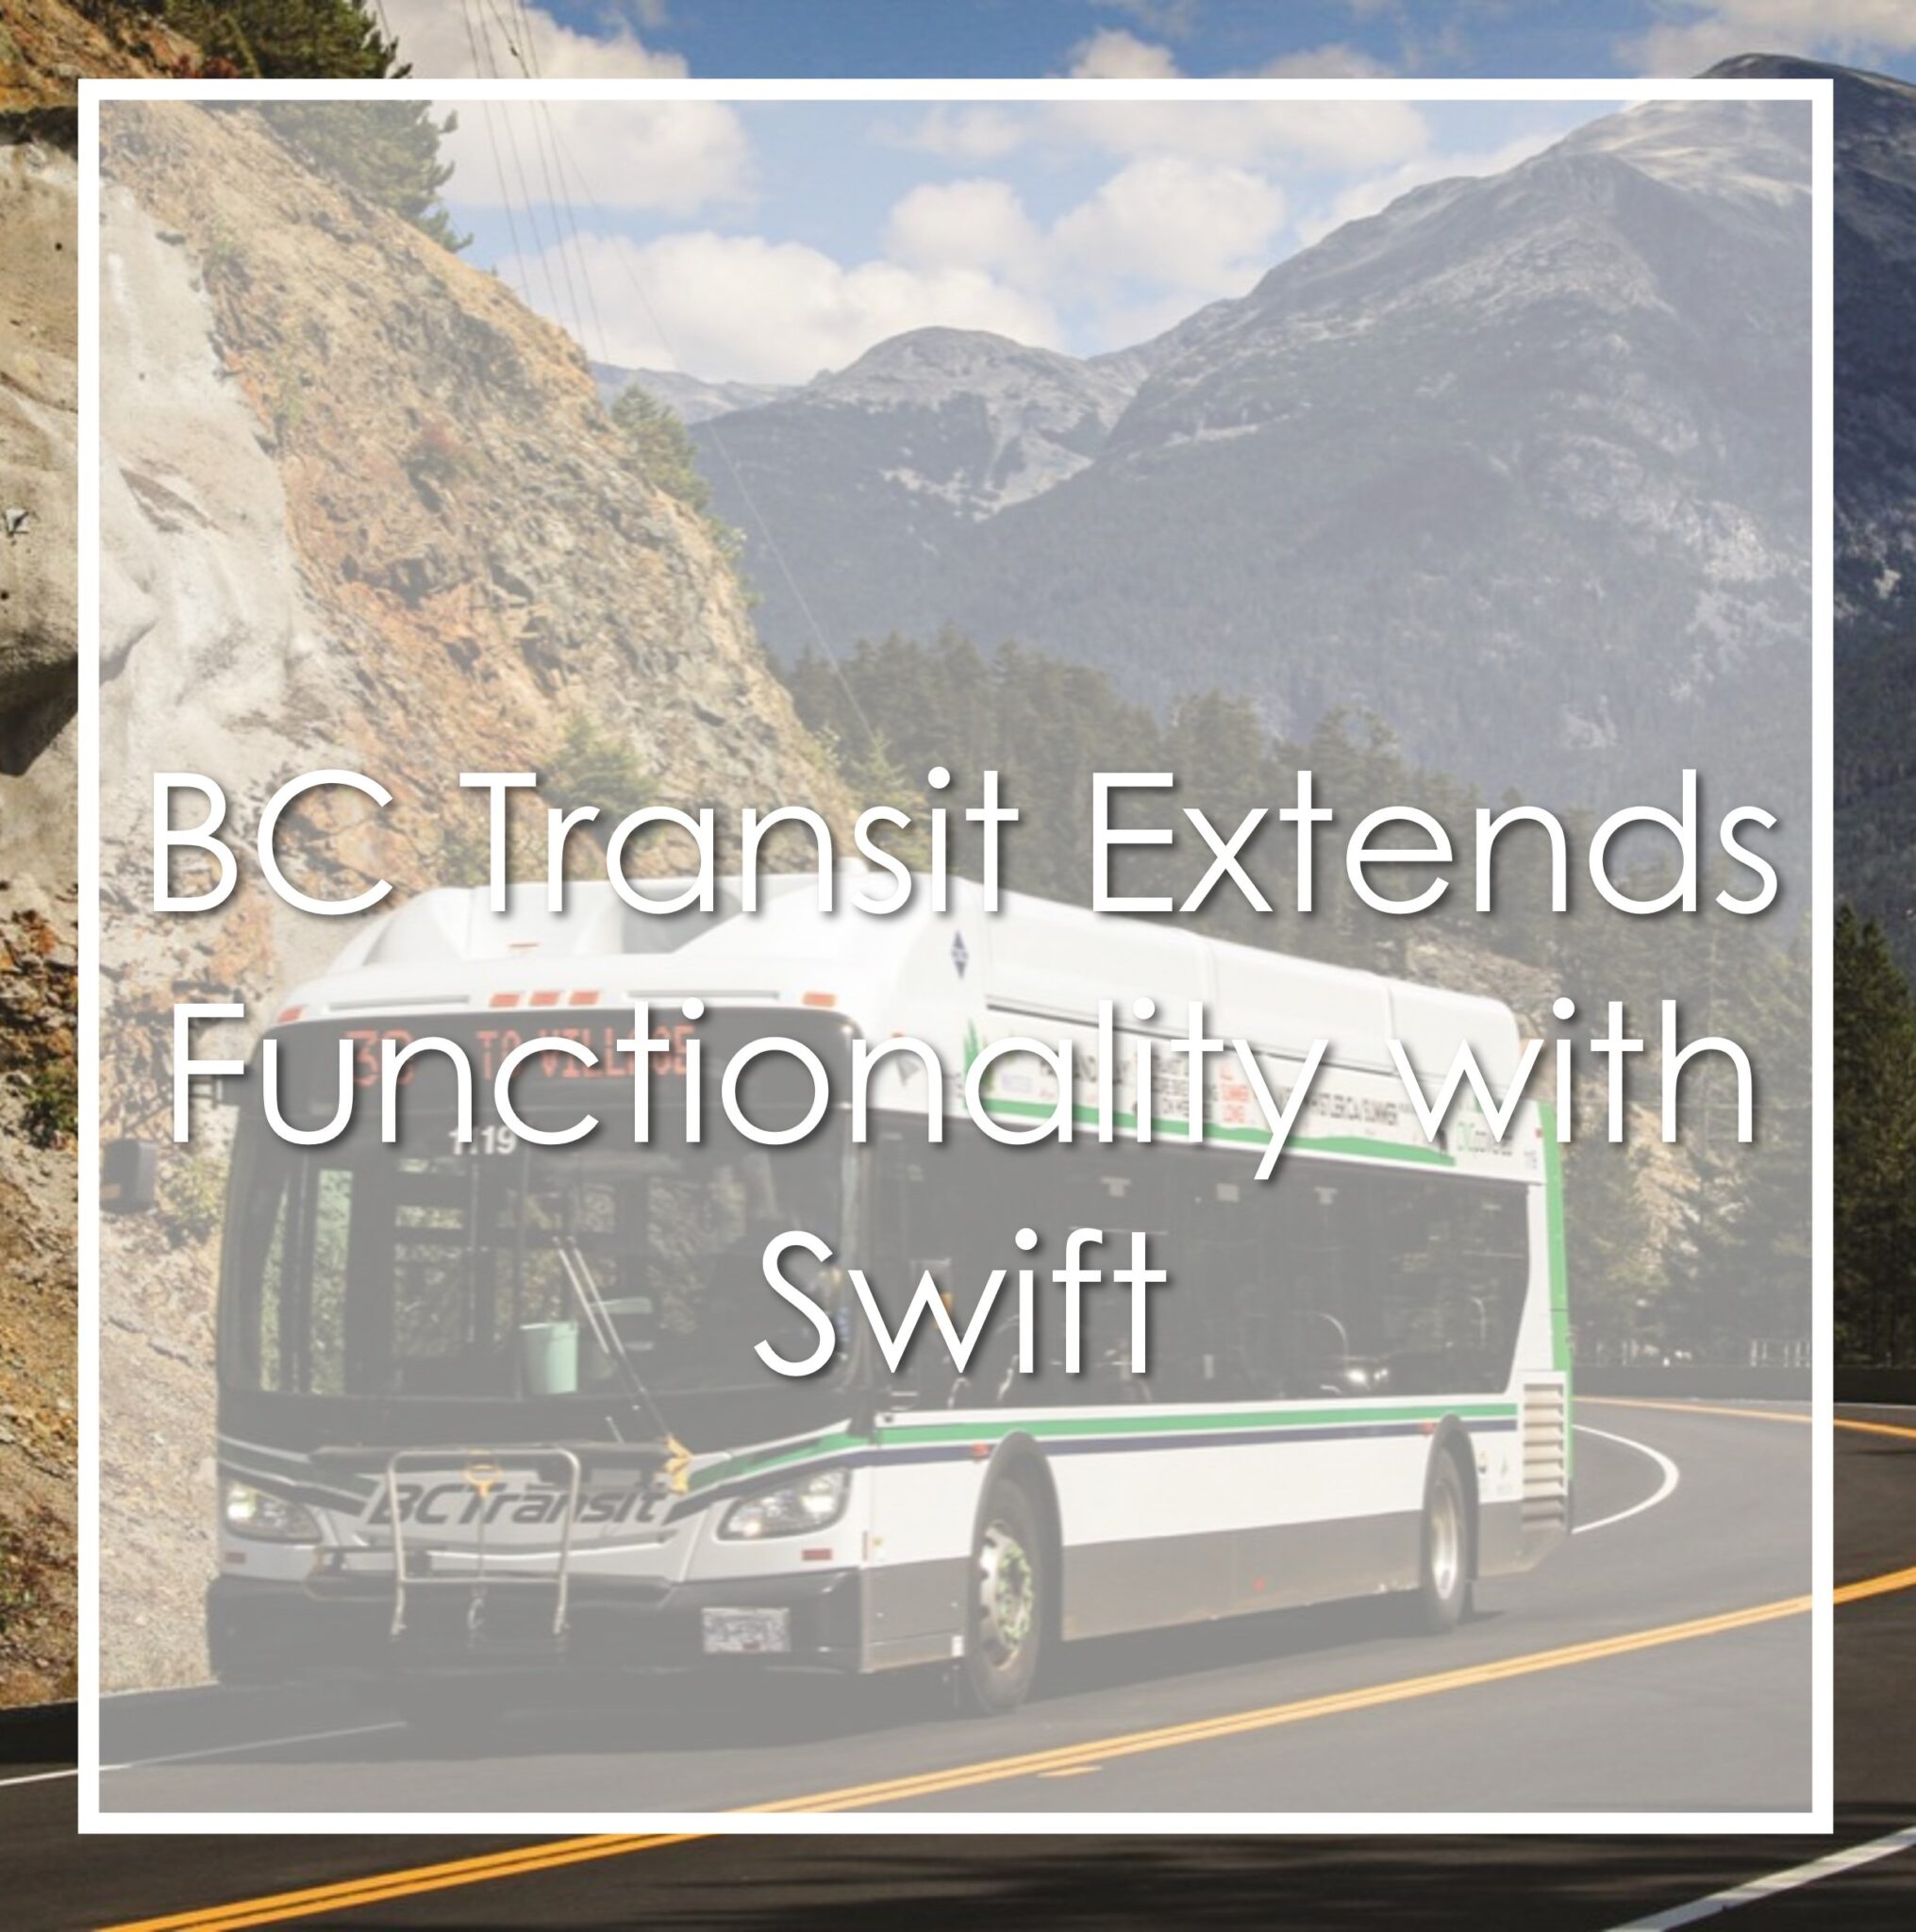 BC Transit selects Swift for JD Edwards mobile application solution, iSP3